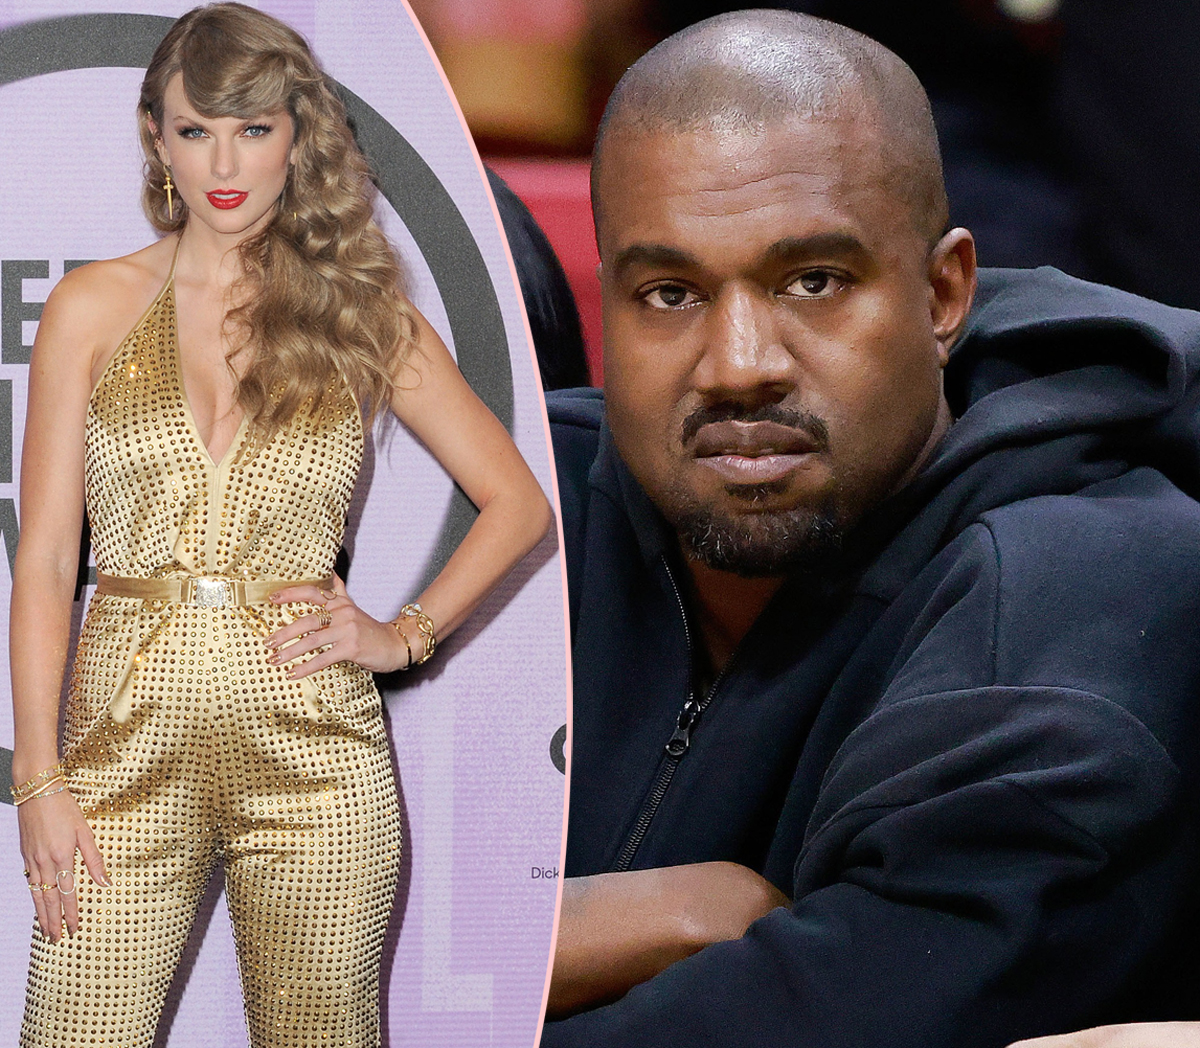 #Reddit Users Take Over Kanye West’s Page To Share Taylor Swift & Holocaust Awareness Posts Amid Antisemitism